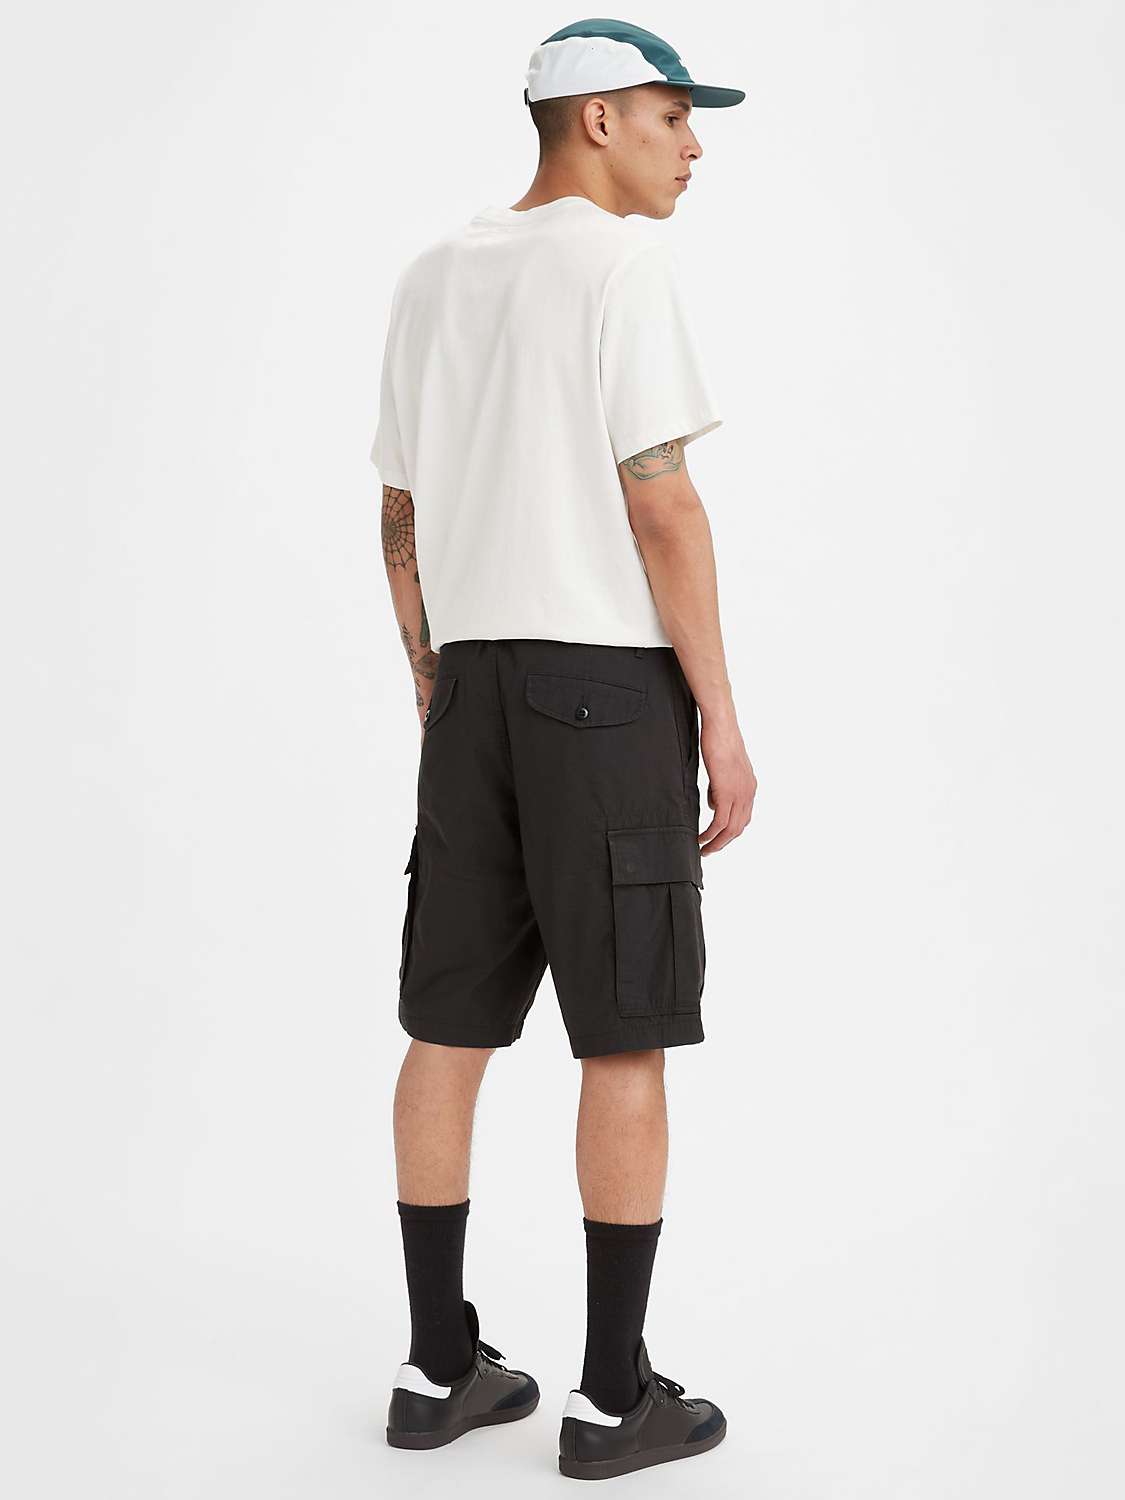 Levi's Carrier Cargo Shorts, Graphite at John Lewis & Partners